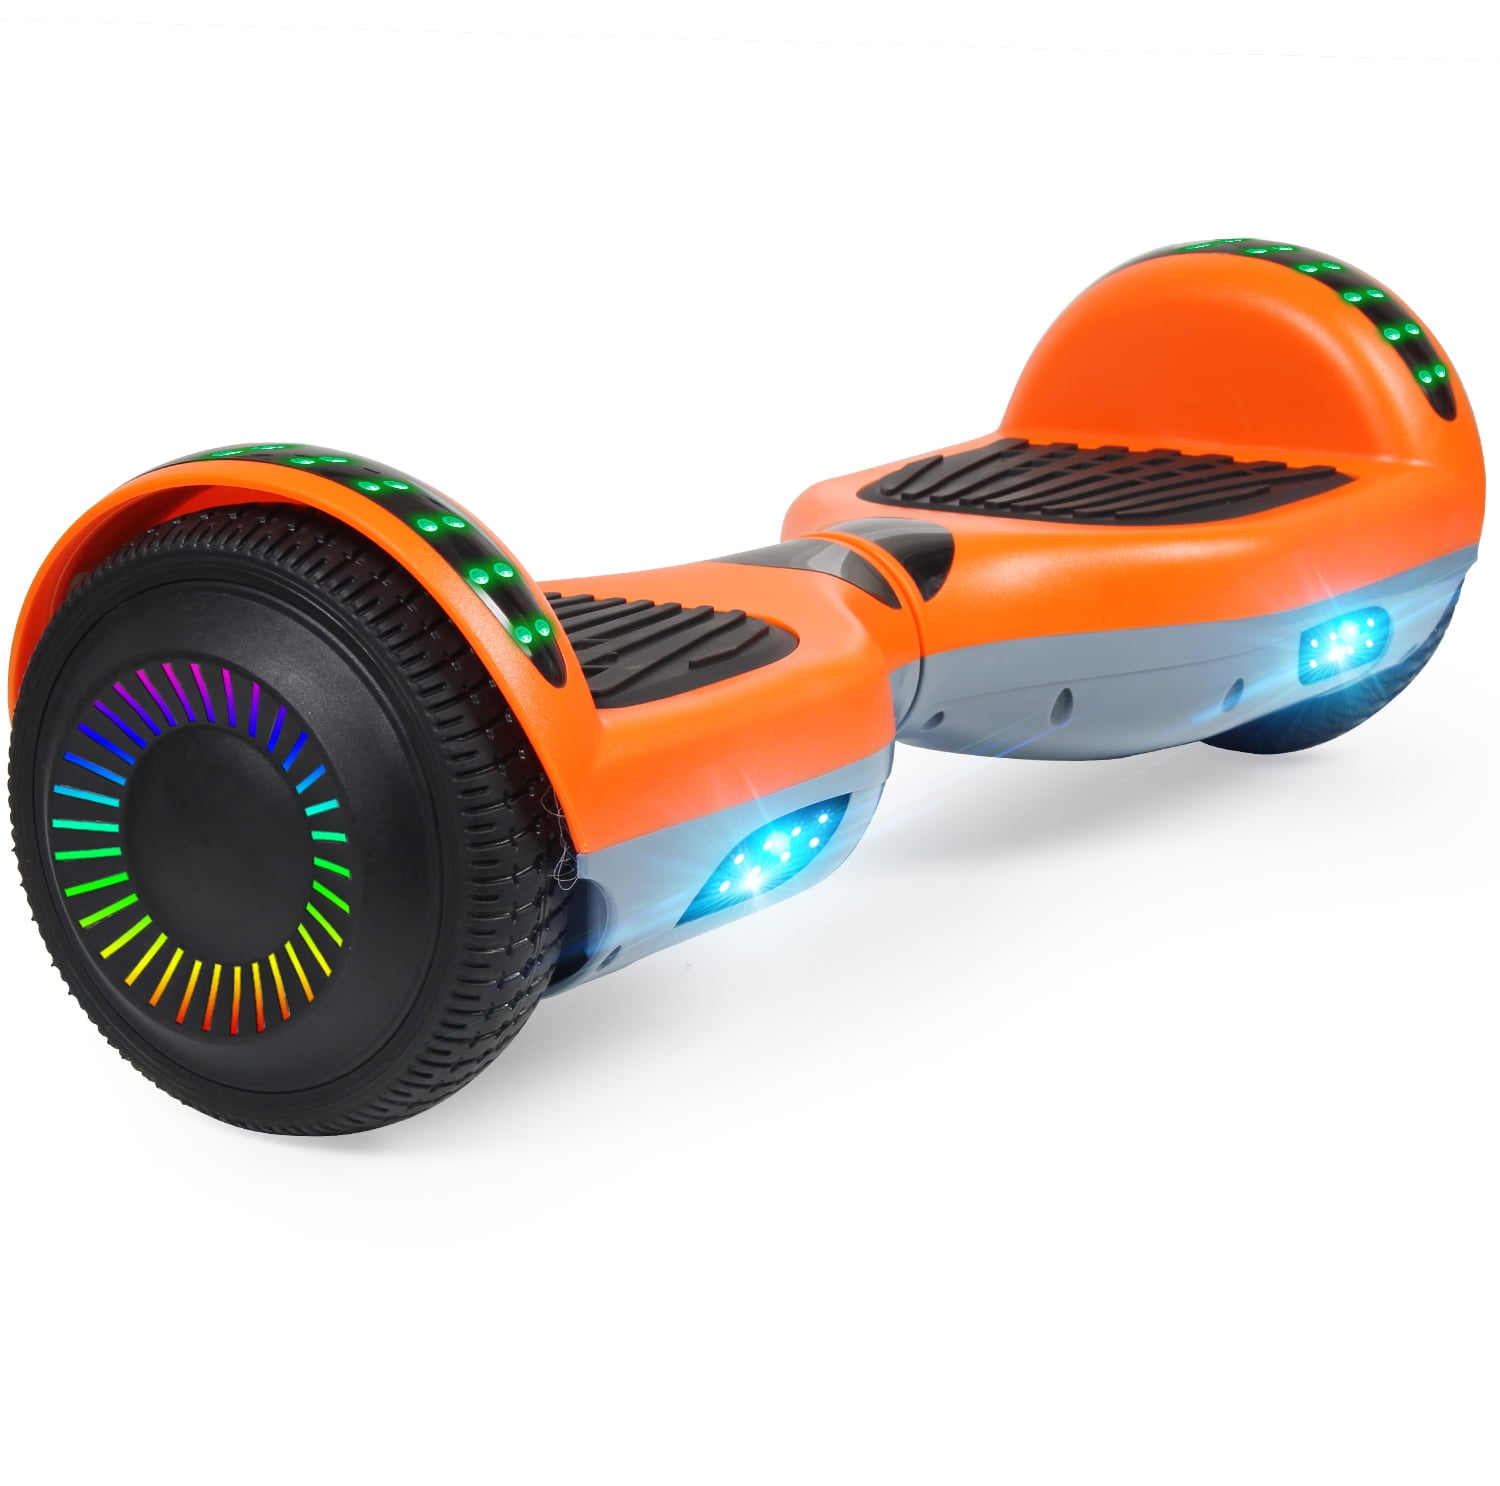 CBD 6.5 Hoverboard for Kids Hoverboard with Bluetooth and LED Lights Electric Self Balancing Scooter UL 2272 Certified Hover Board 